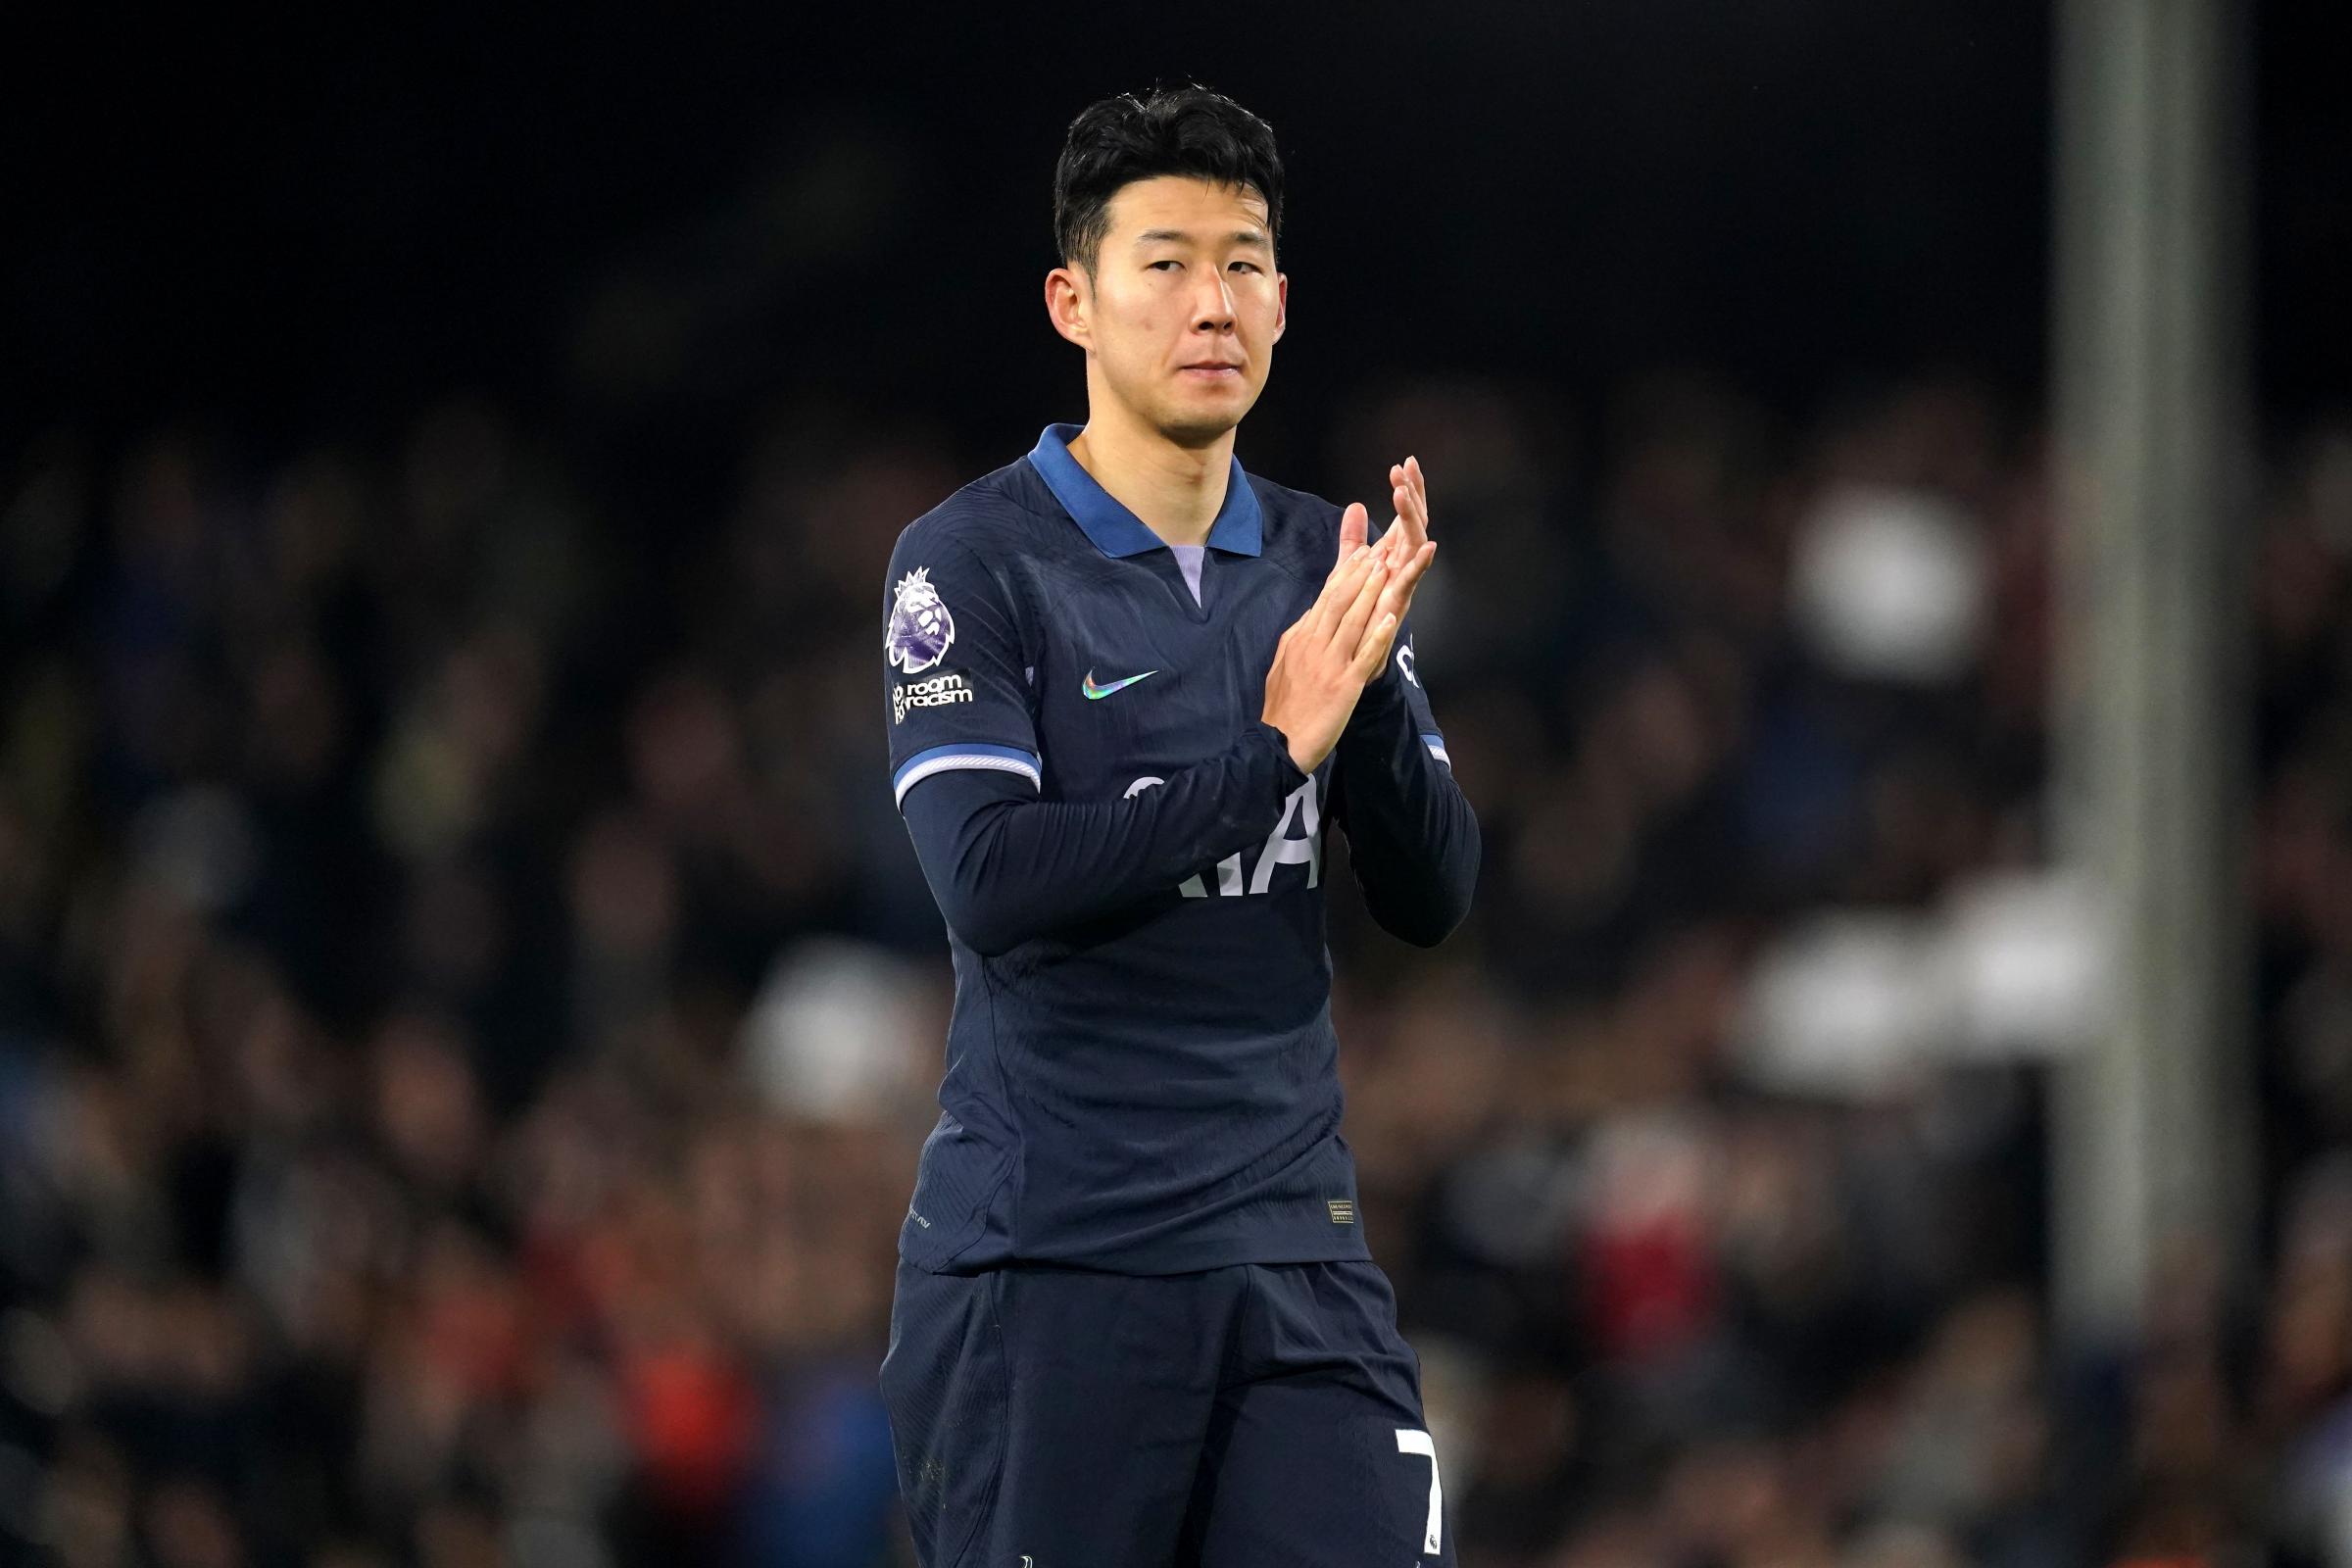 Tottenham skipper Son Heung-min critical of side after embarrassing loss to Fulham.